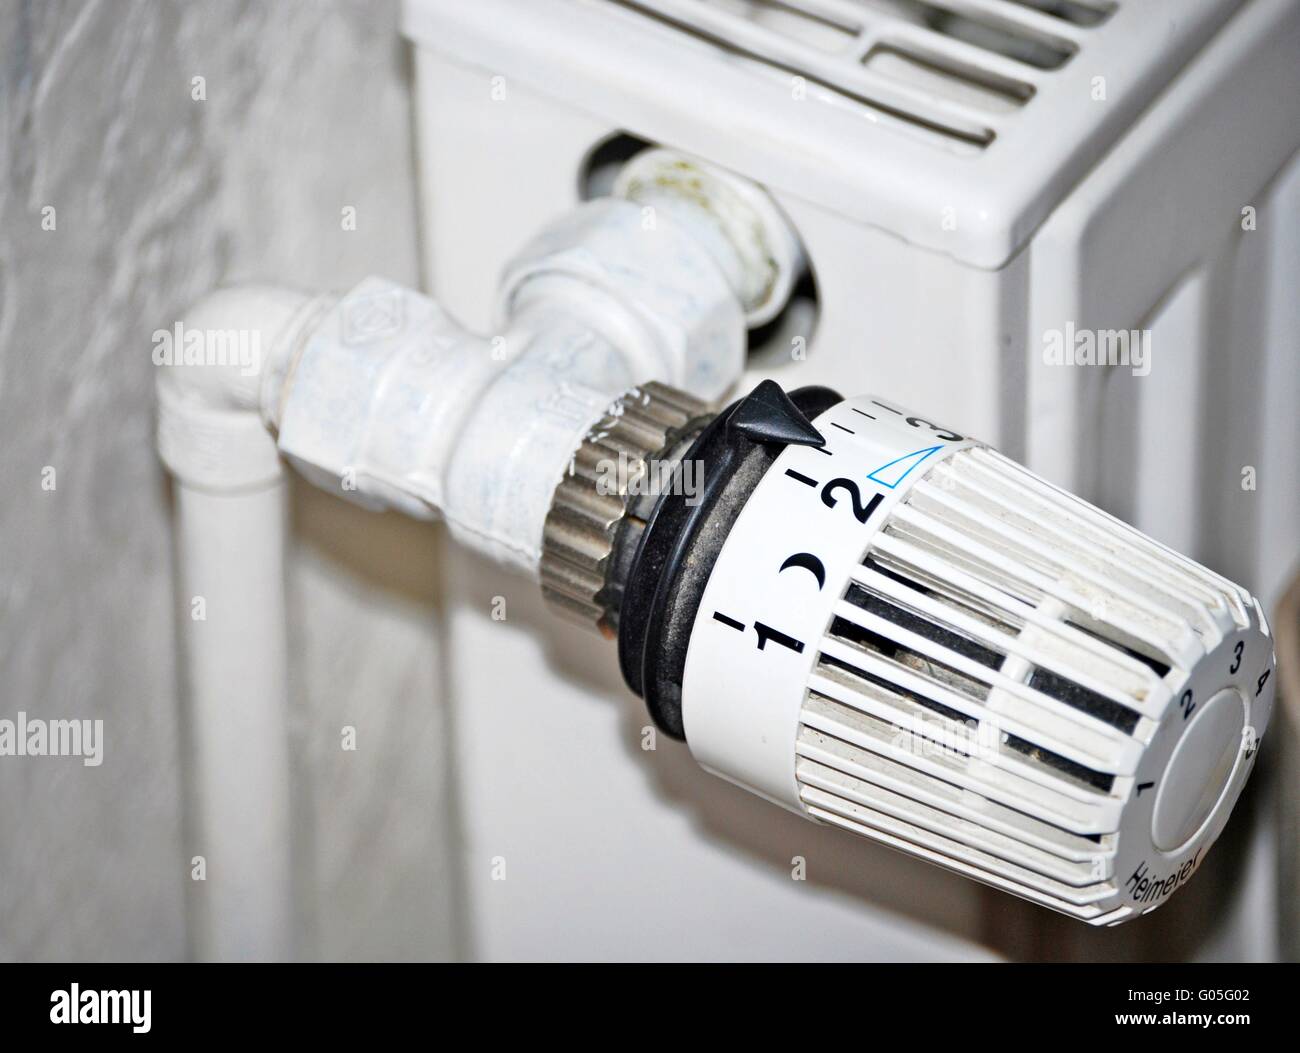 heating thermostate Stock Photo